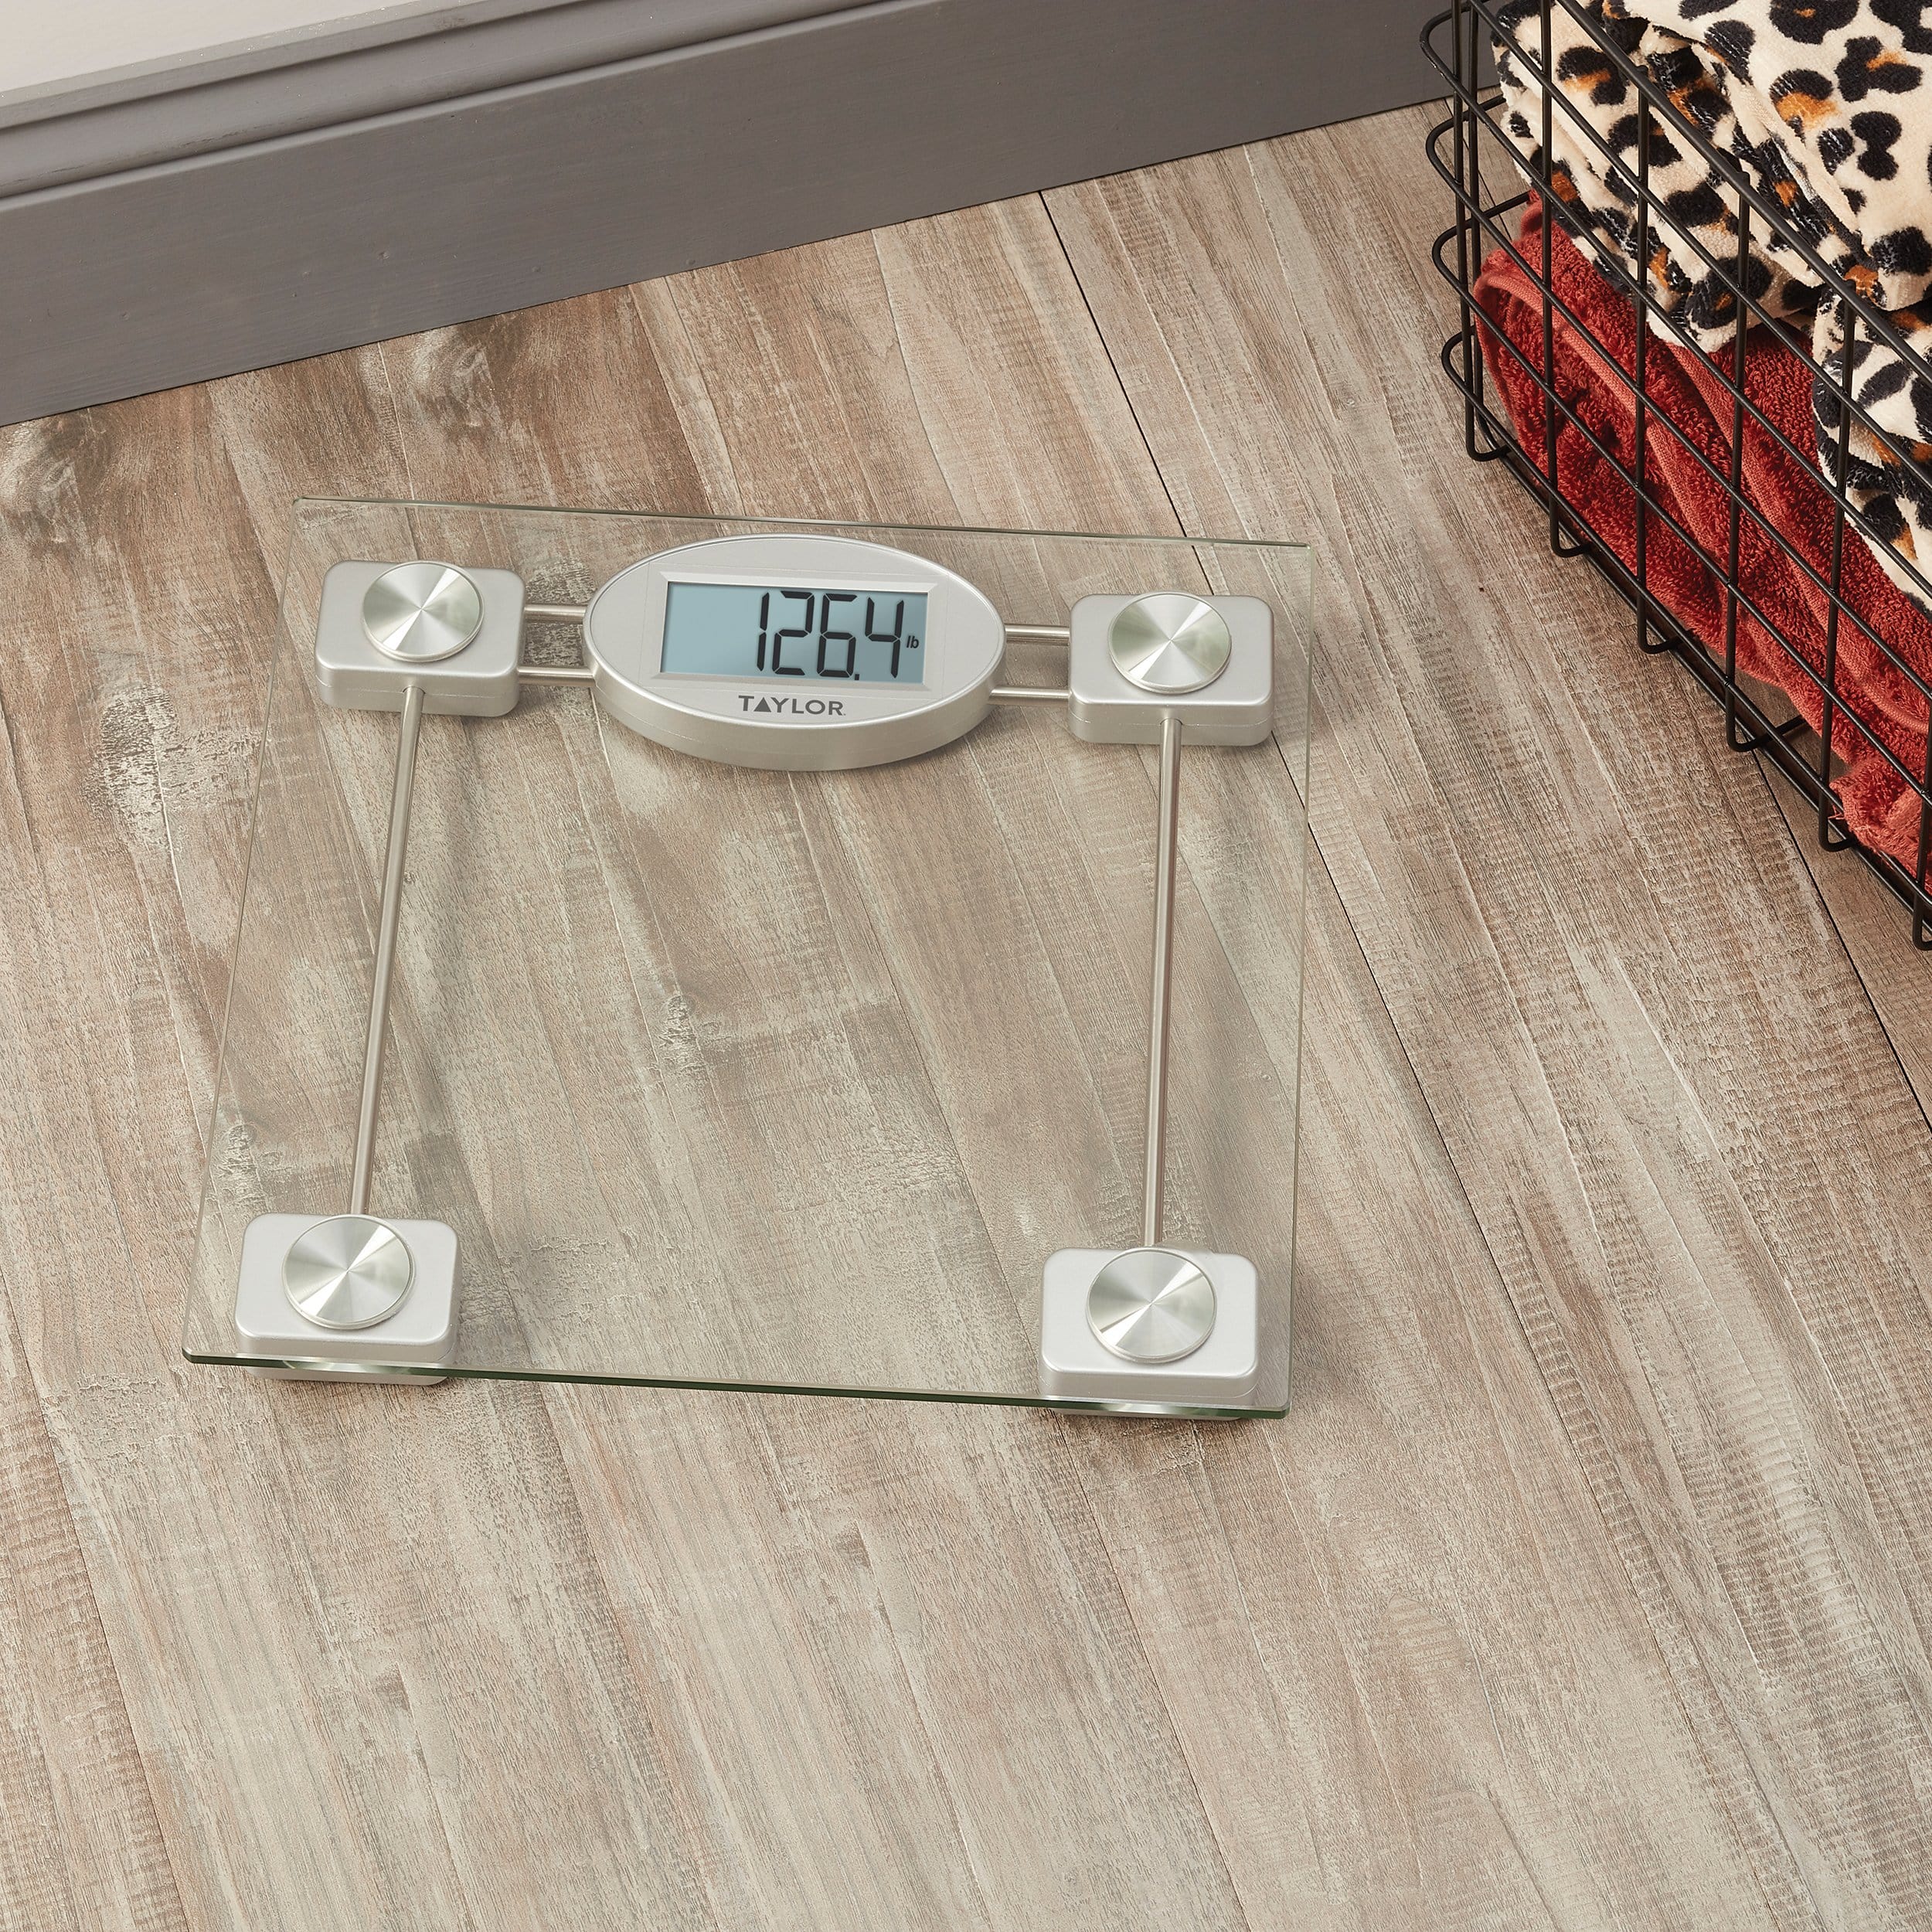 Taylor 400 Lb. Capacity Clear Glass Digital Bathroom Scale with Metallic  Accents, 11.8-inch x 11.8-inch Platform, Silver